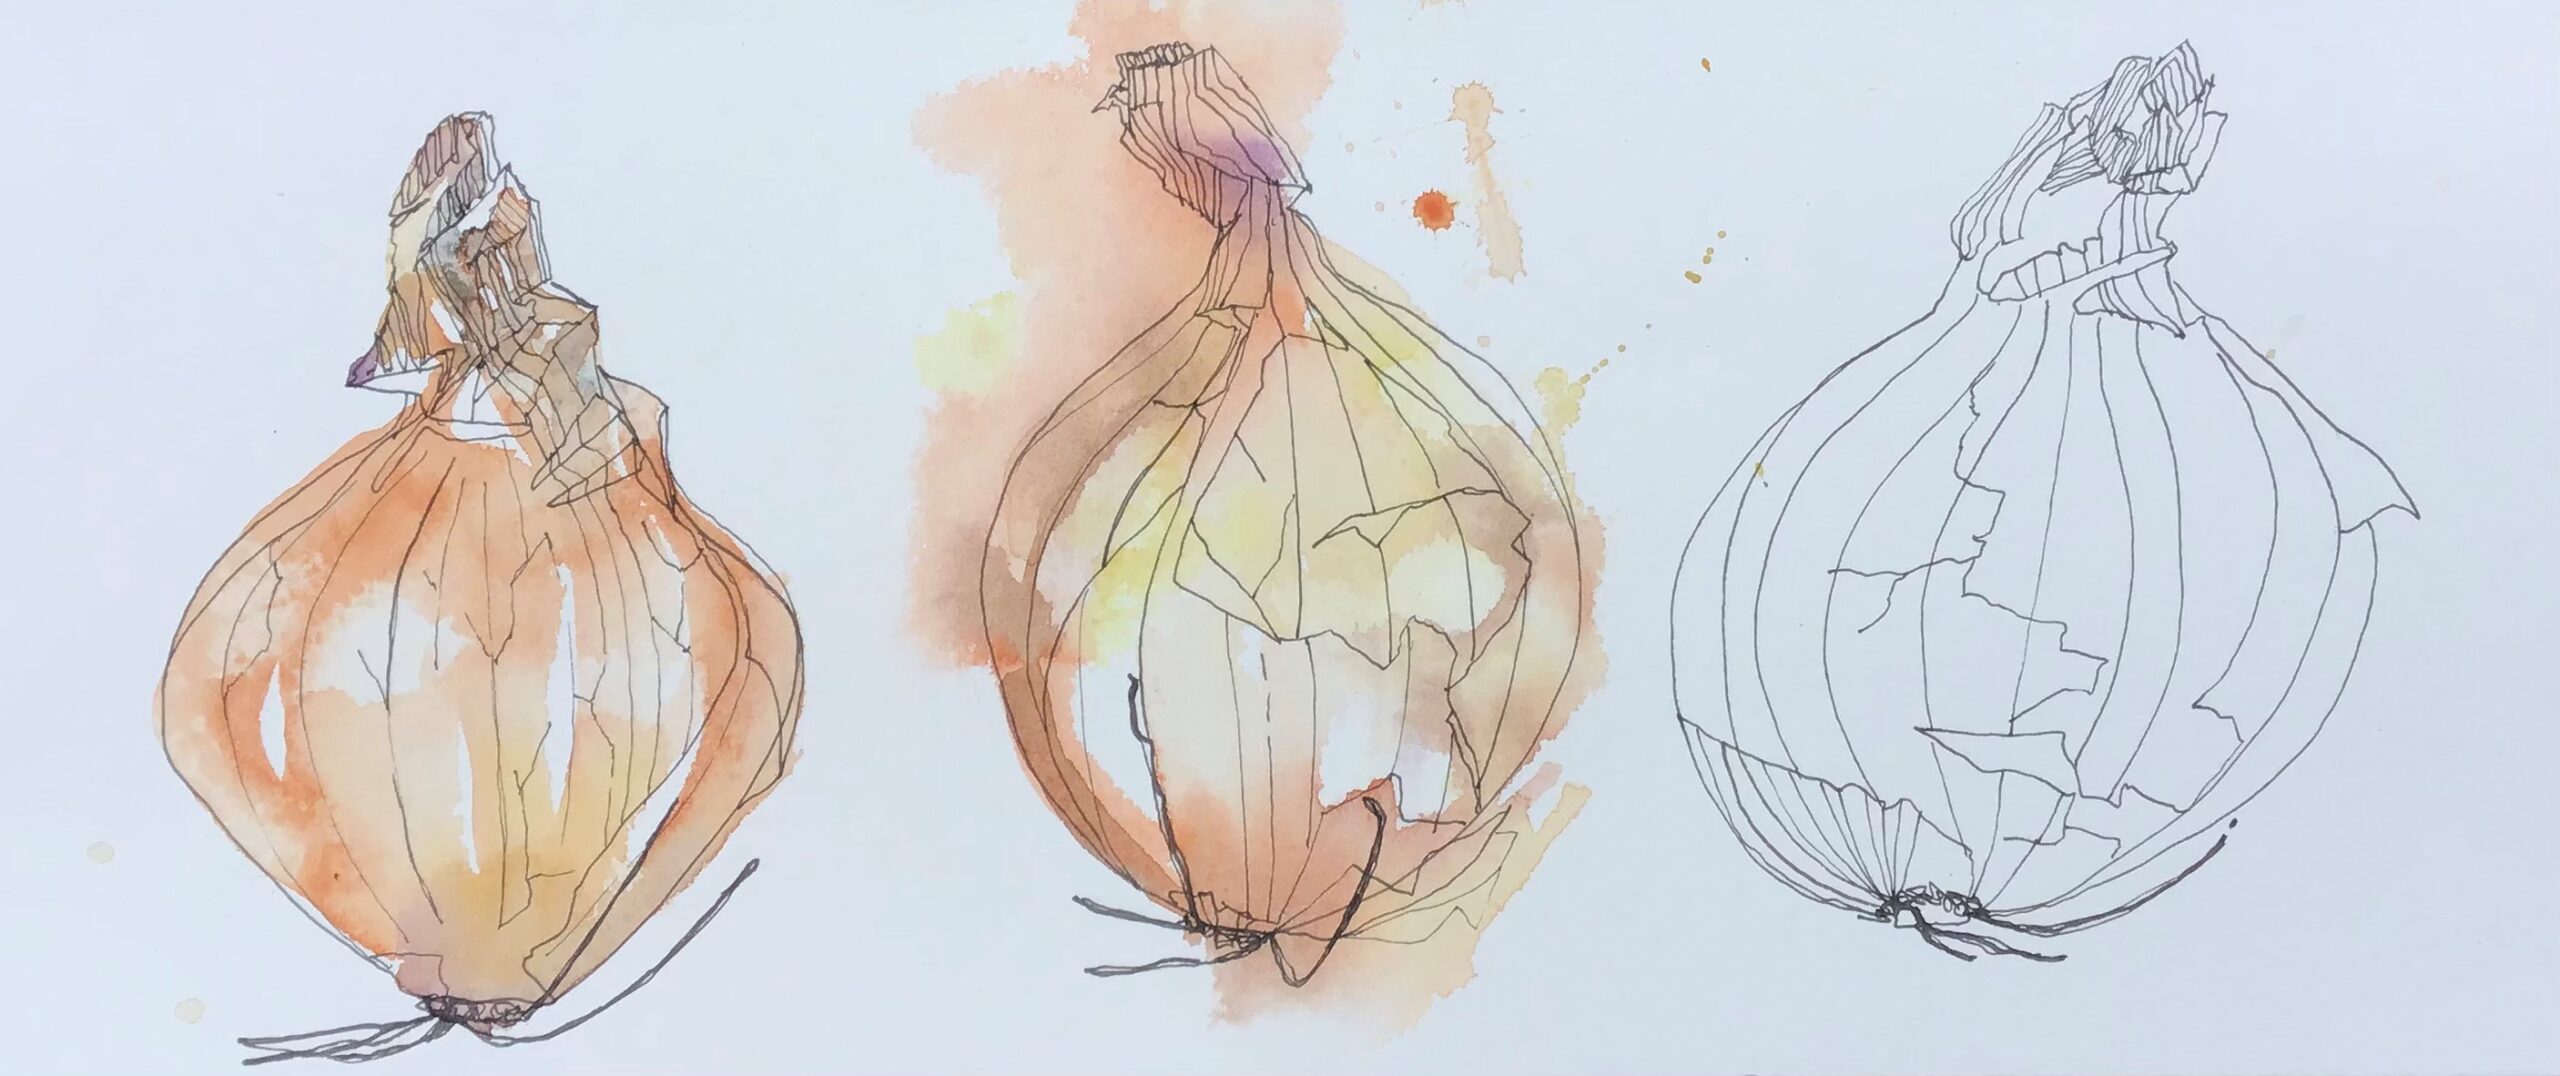 Pen and wash flower demonstration - Painting With Watercolors